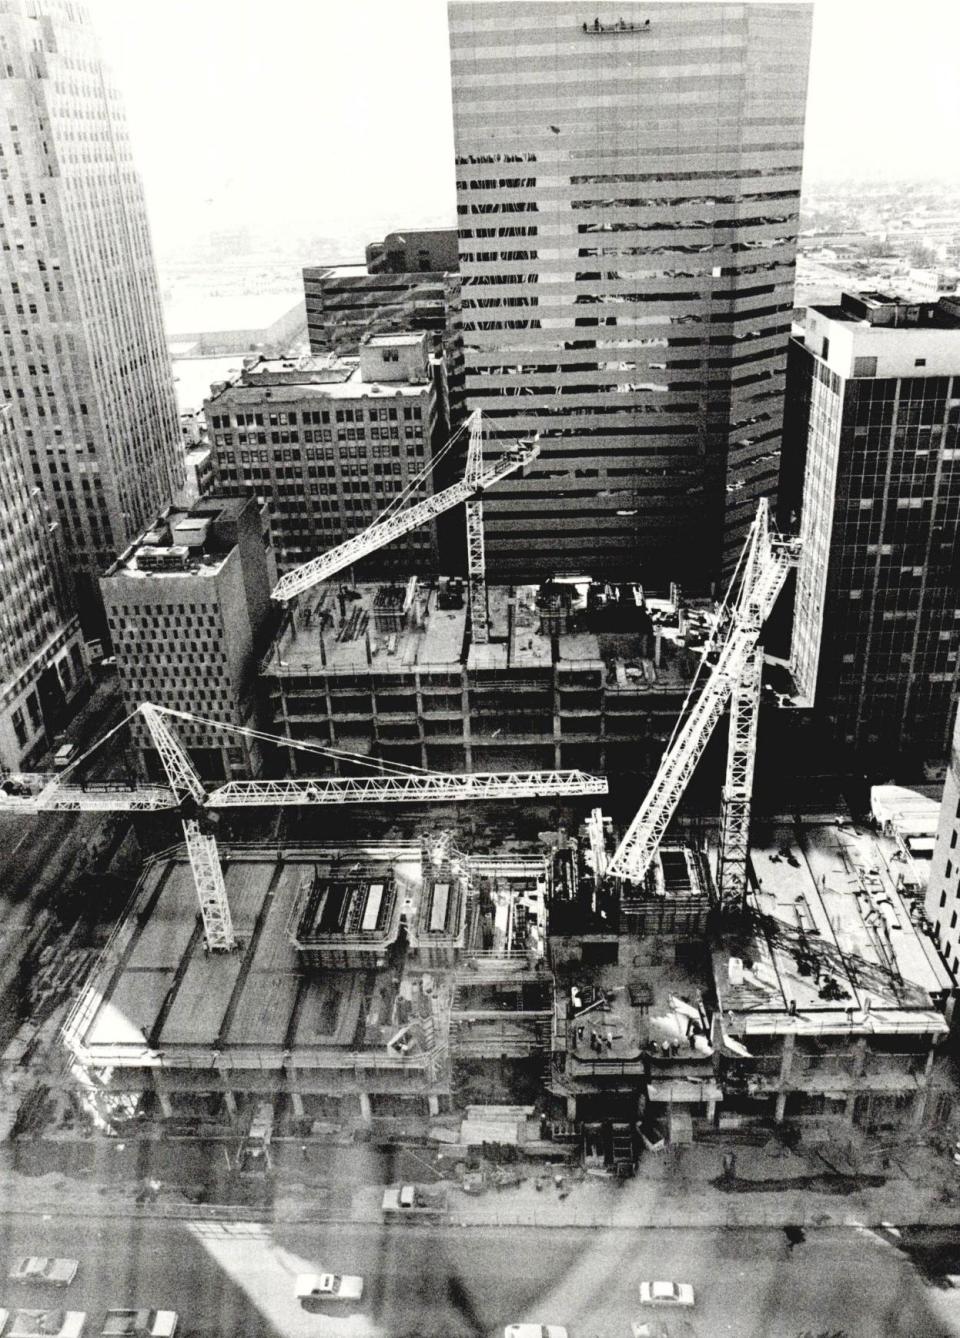 March 2, 1983, construction was progressing for Leadership Square.